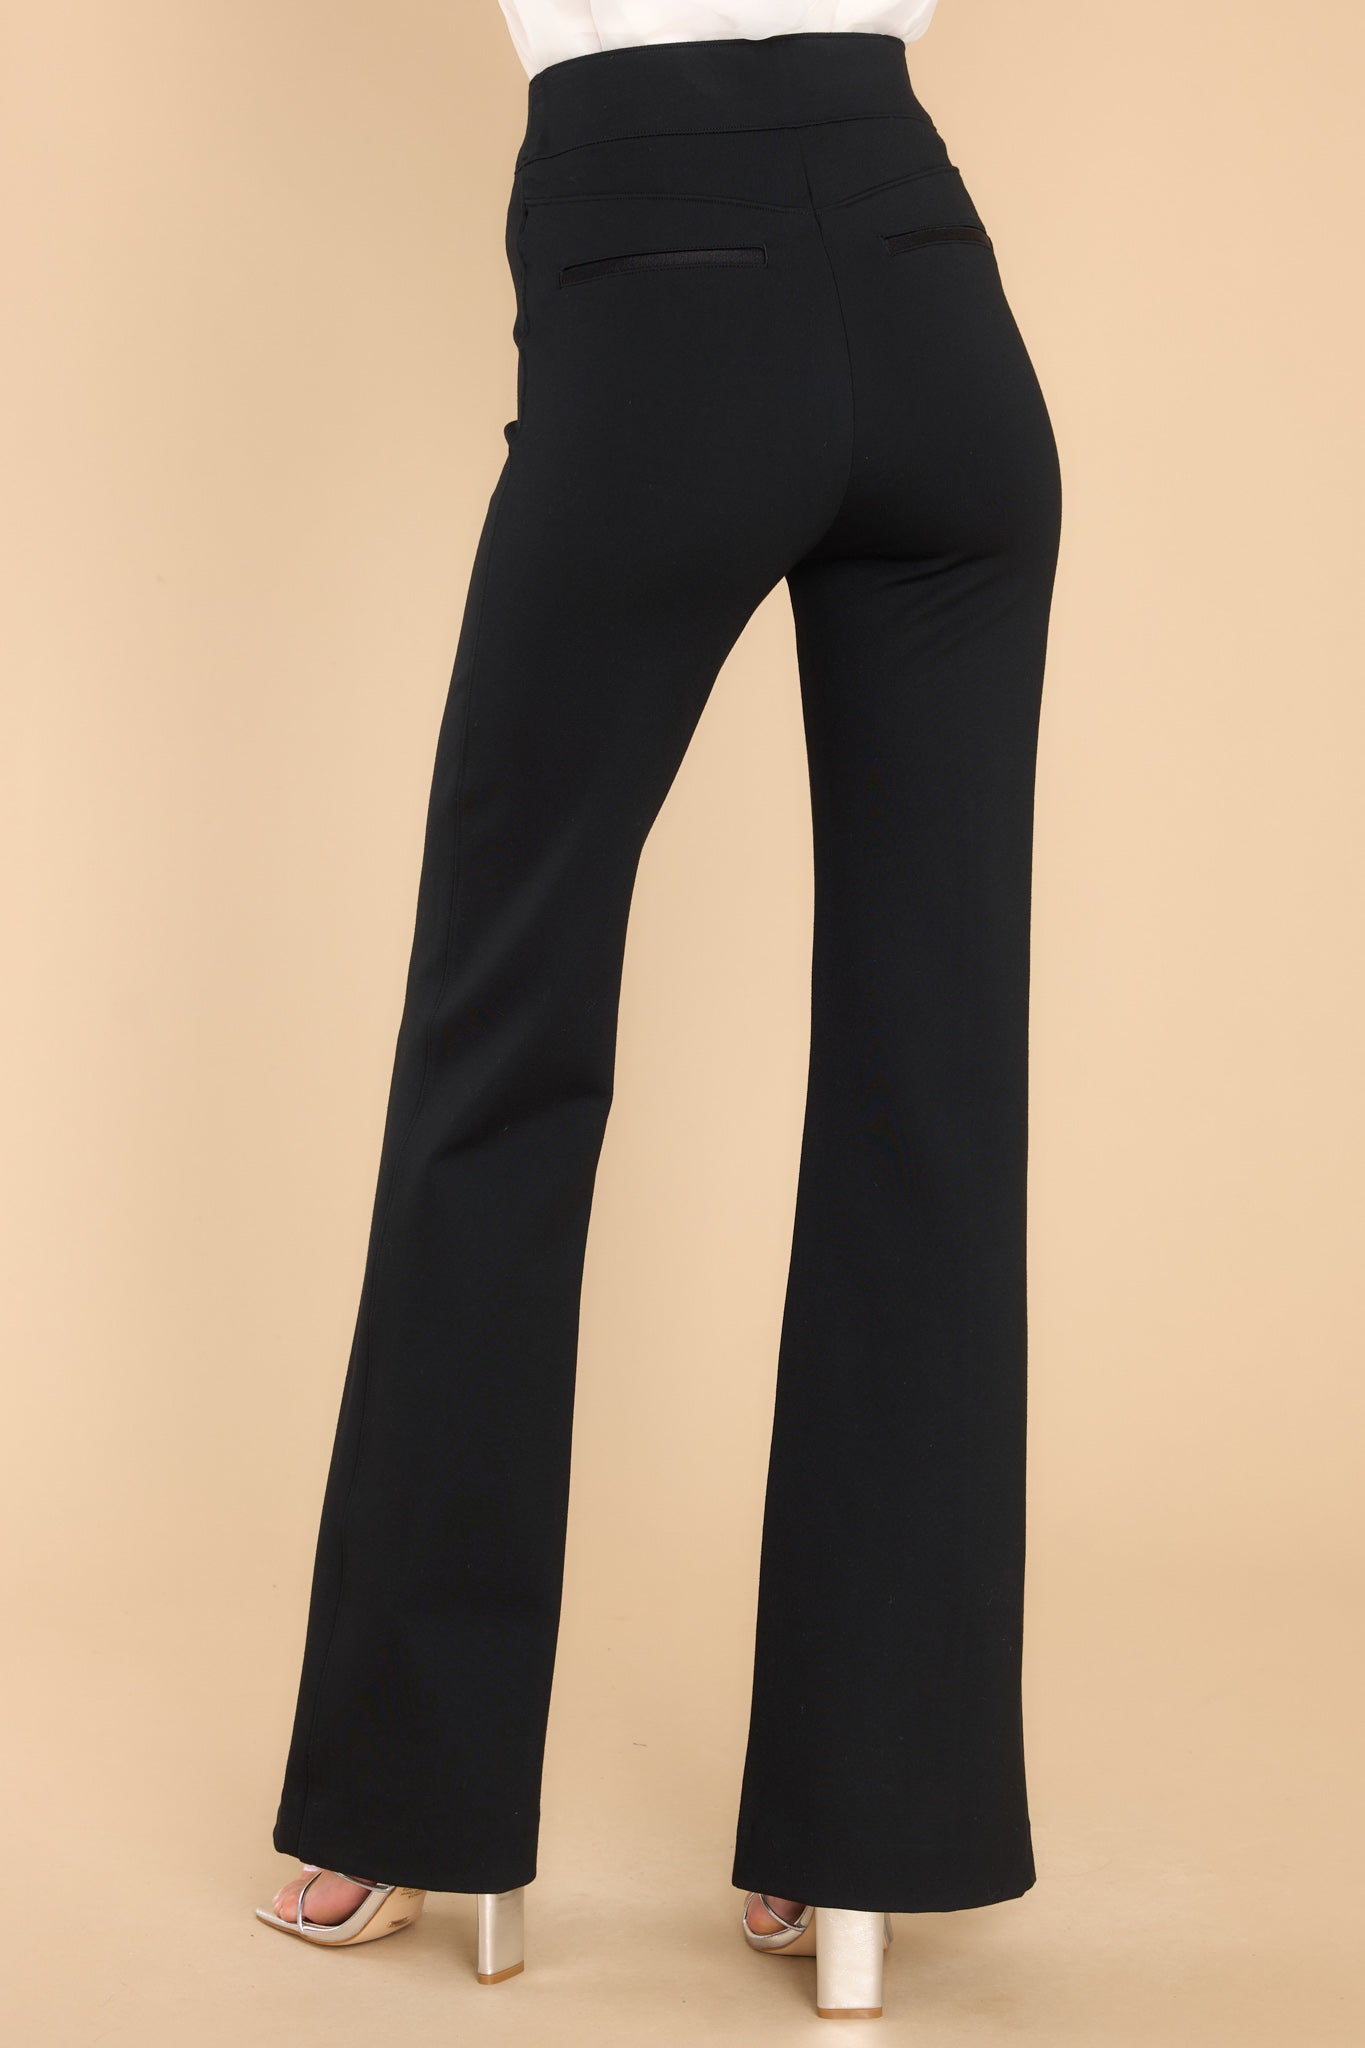 Spanx The Perfect Pant Hi-Rise Flare Black Ponte Knit Pull-On